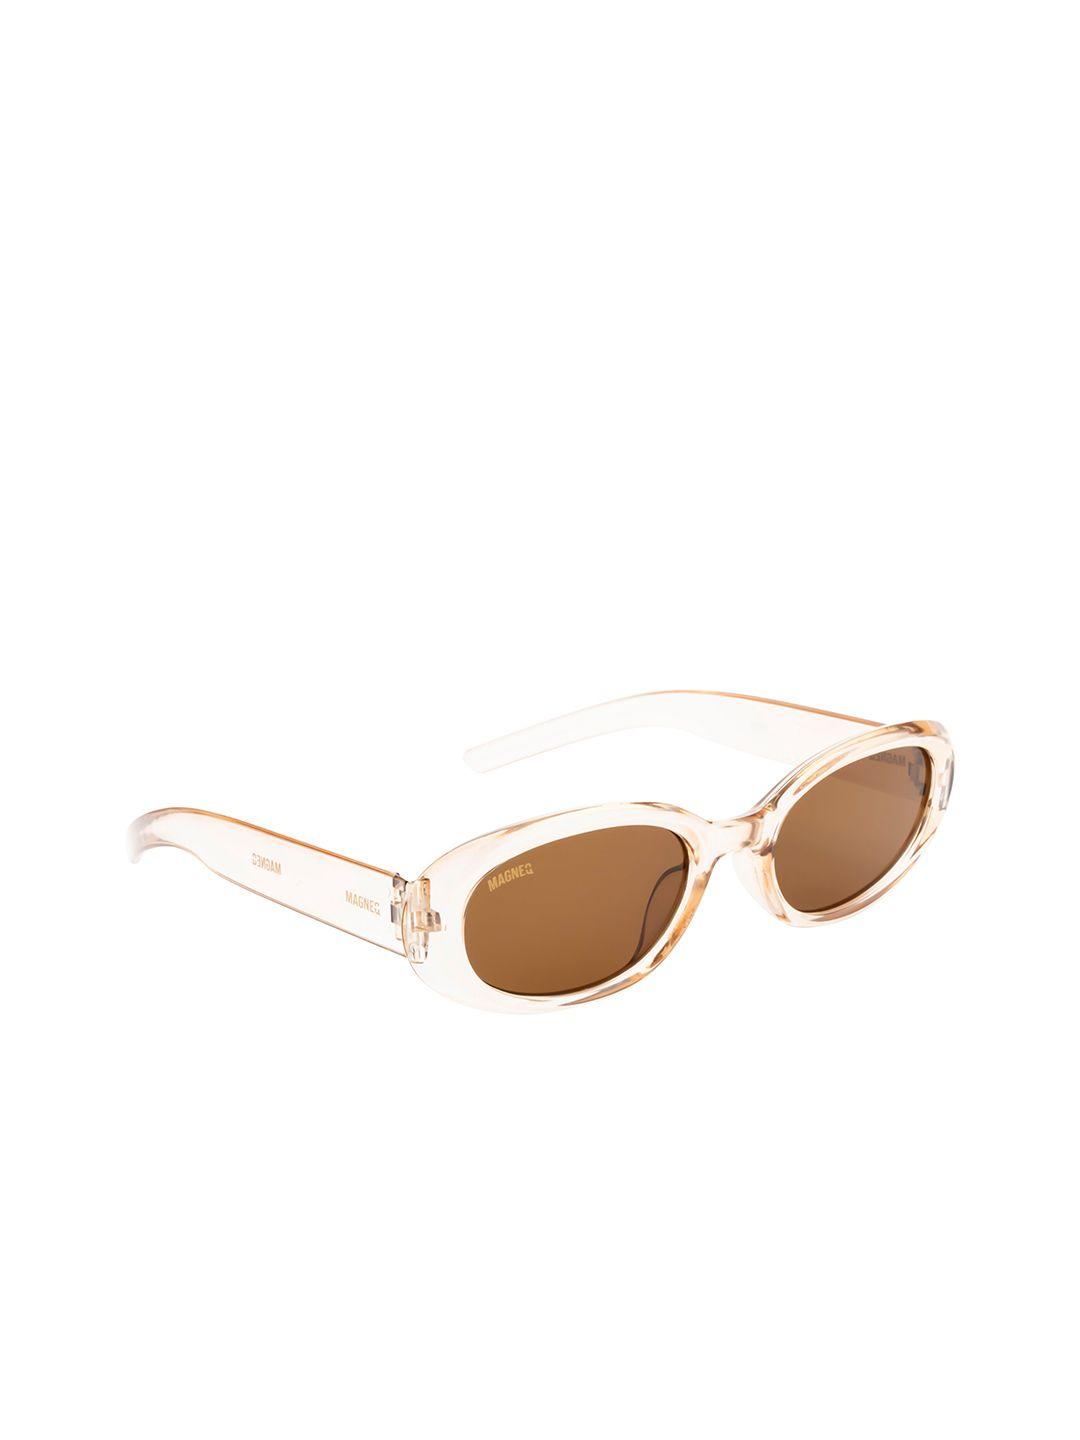 magneq unisex brown lens & rose gold-toned oval sunglasses with uv protected lens